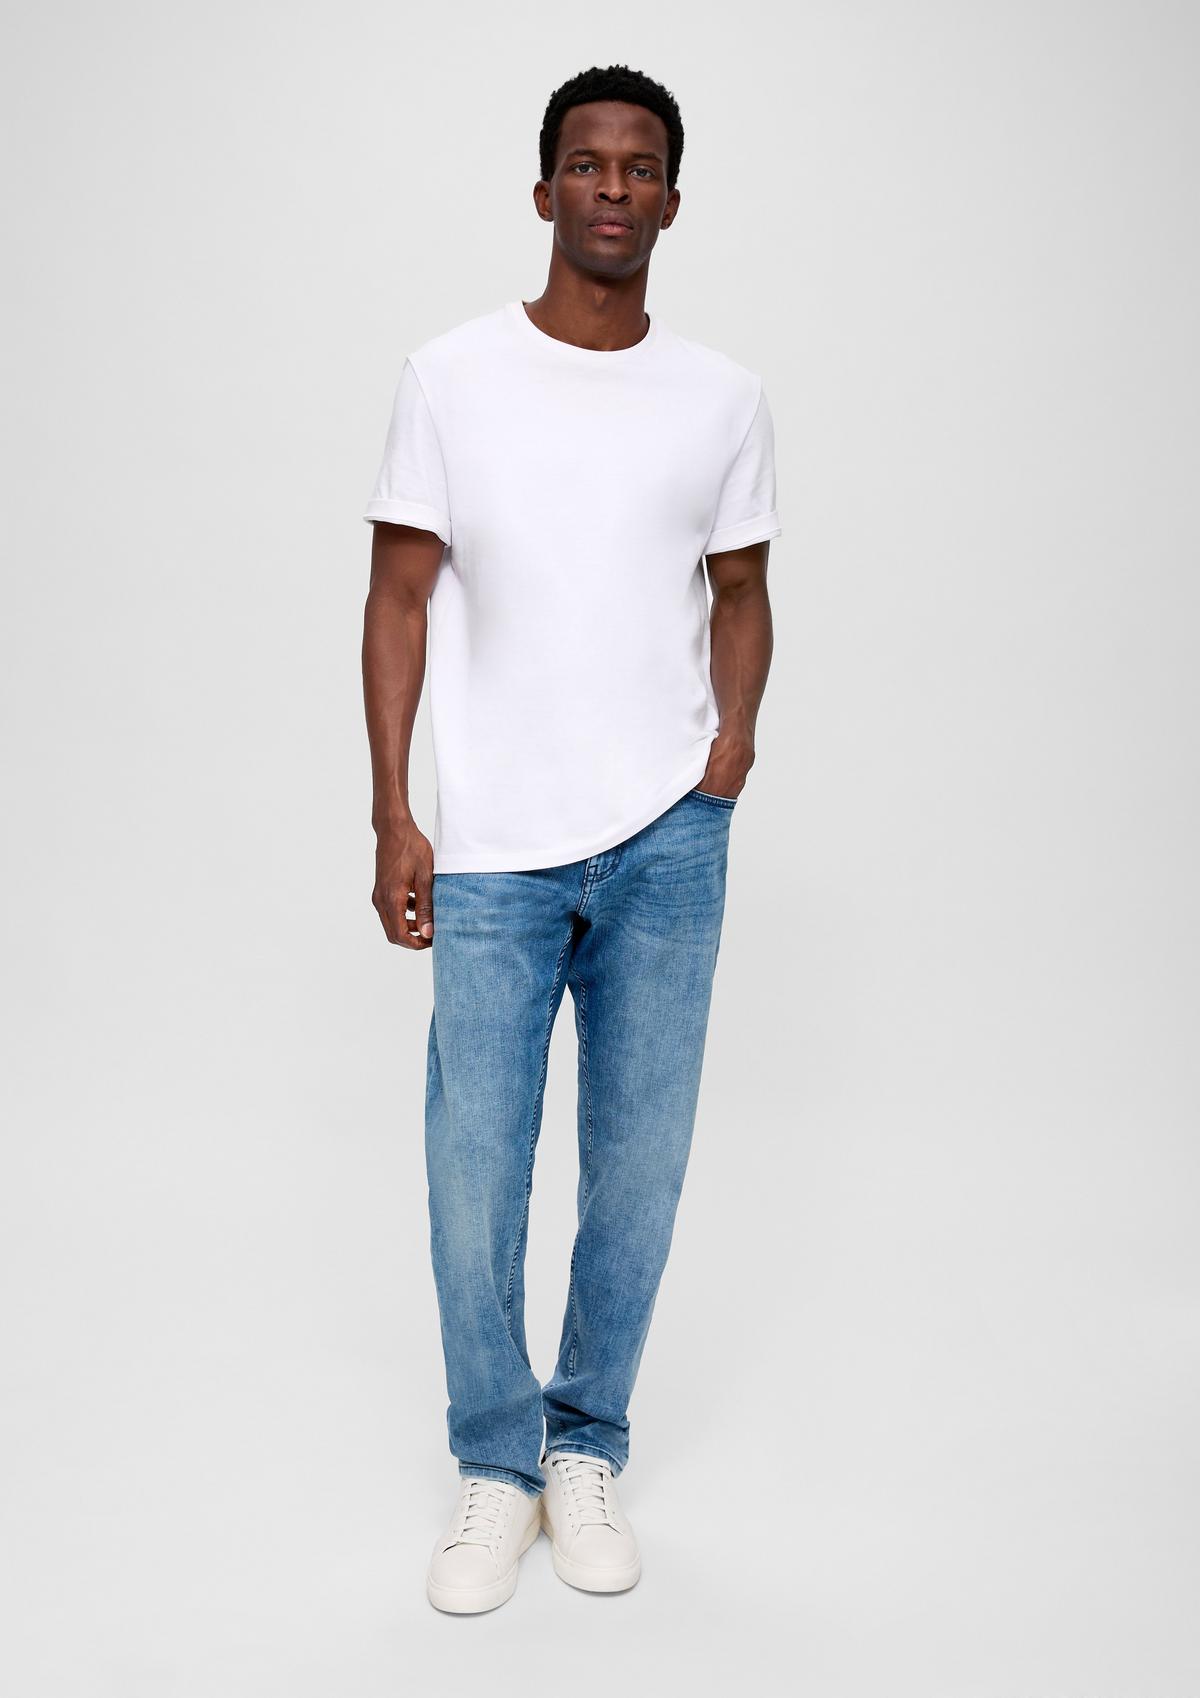 s.Oliver Jean Mauro / coupe Regular Fit / taille haute / Tapered Leg / coton stretch